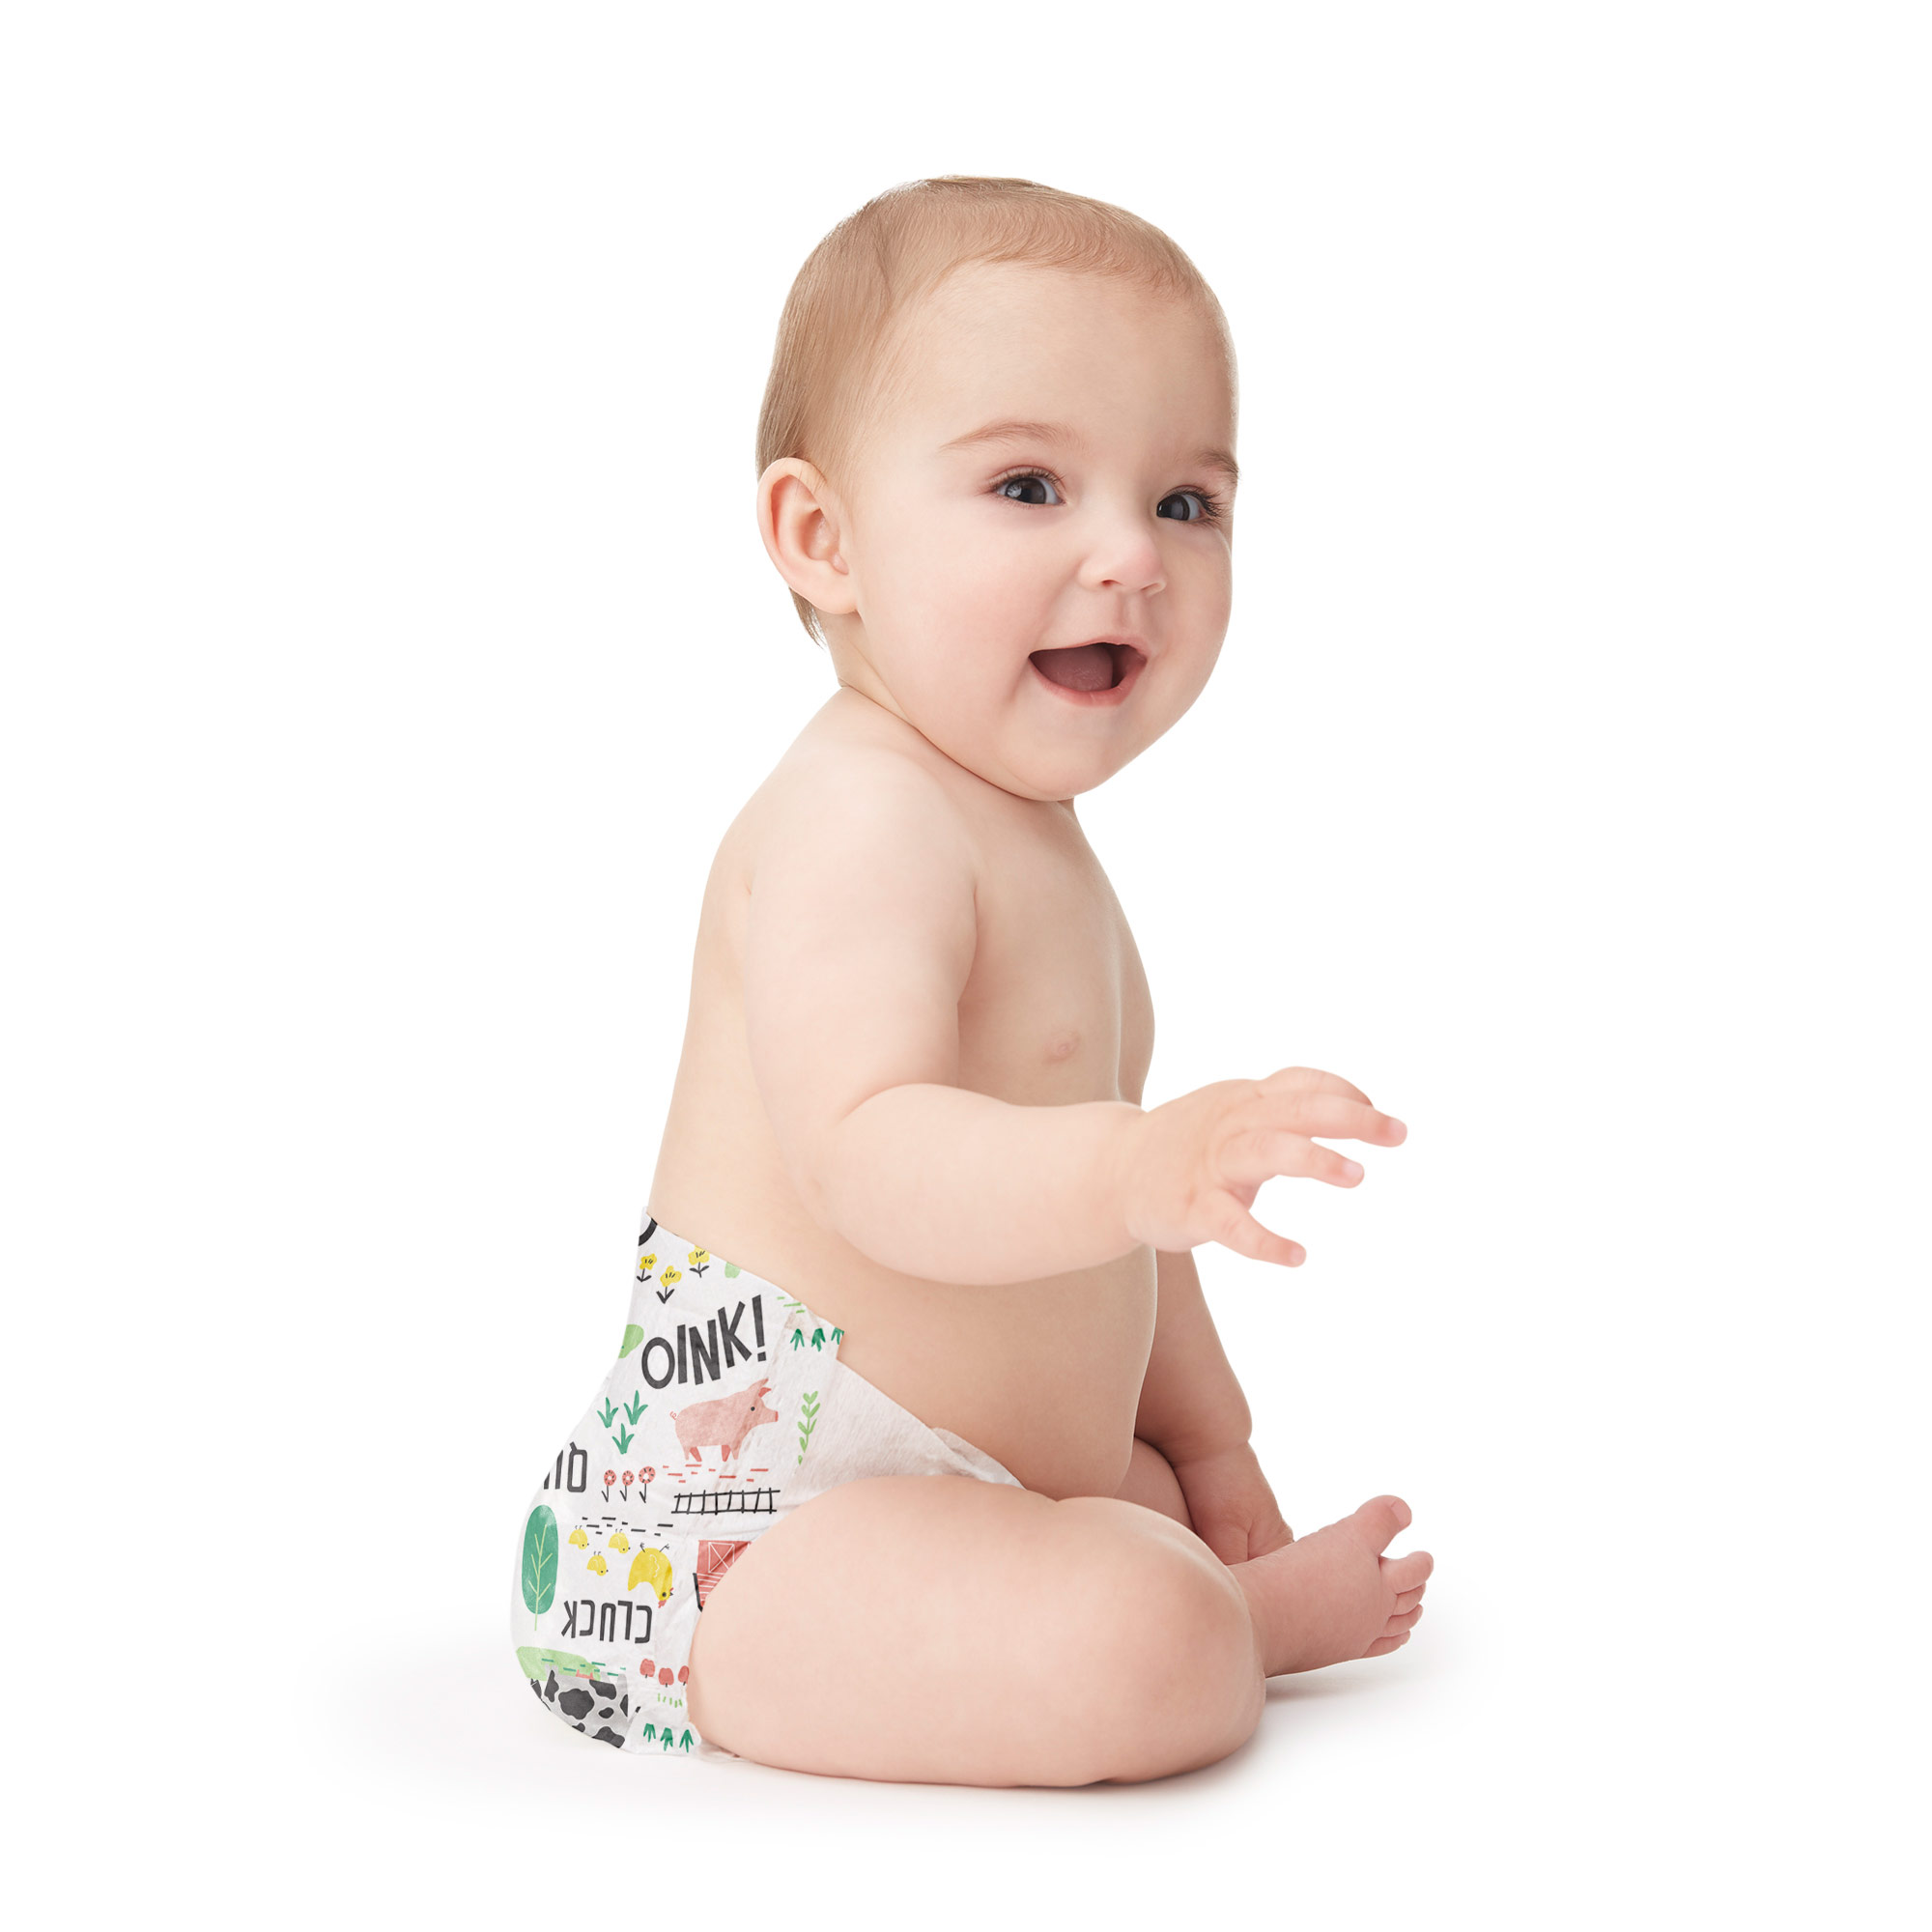 Honest Clean Conscious Baby Diaper, Barnyard Babies, Size 2, Advanced Leak protection, Plant-Based